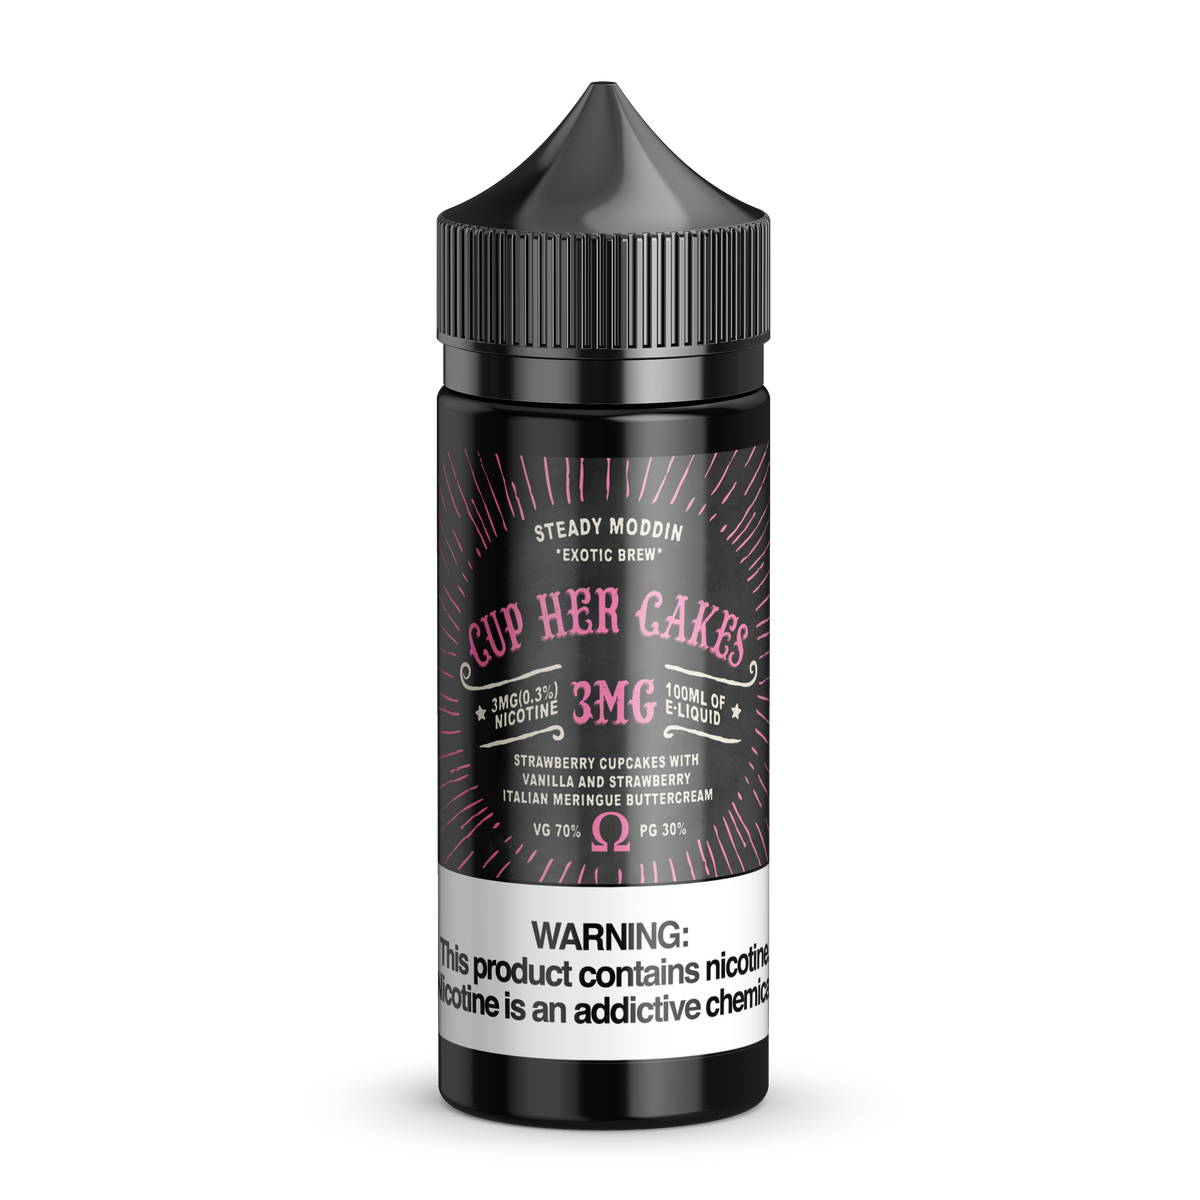 100ML | Cup Her Cakes by Steady Moddin&#39;s Exotic Brew